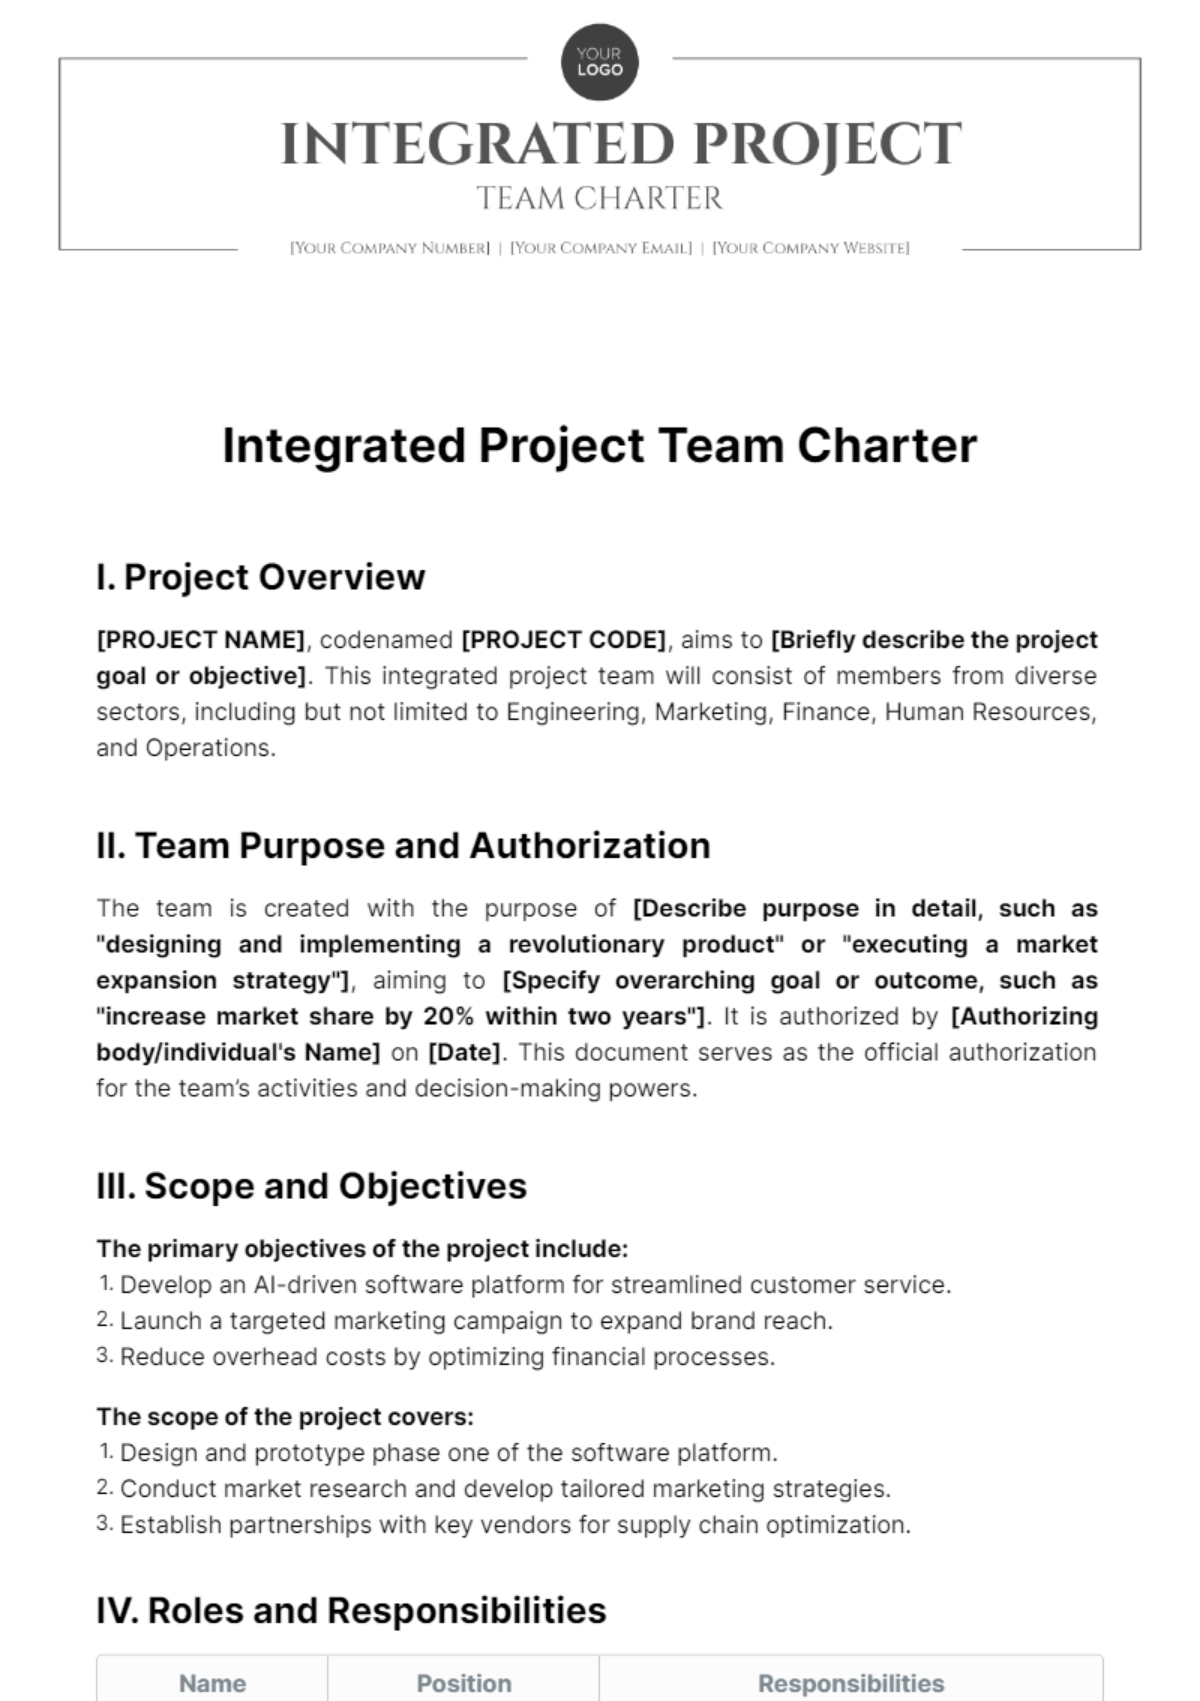 Integrated Project Team Charter Template